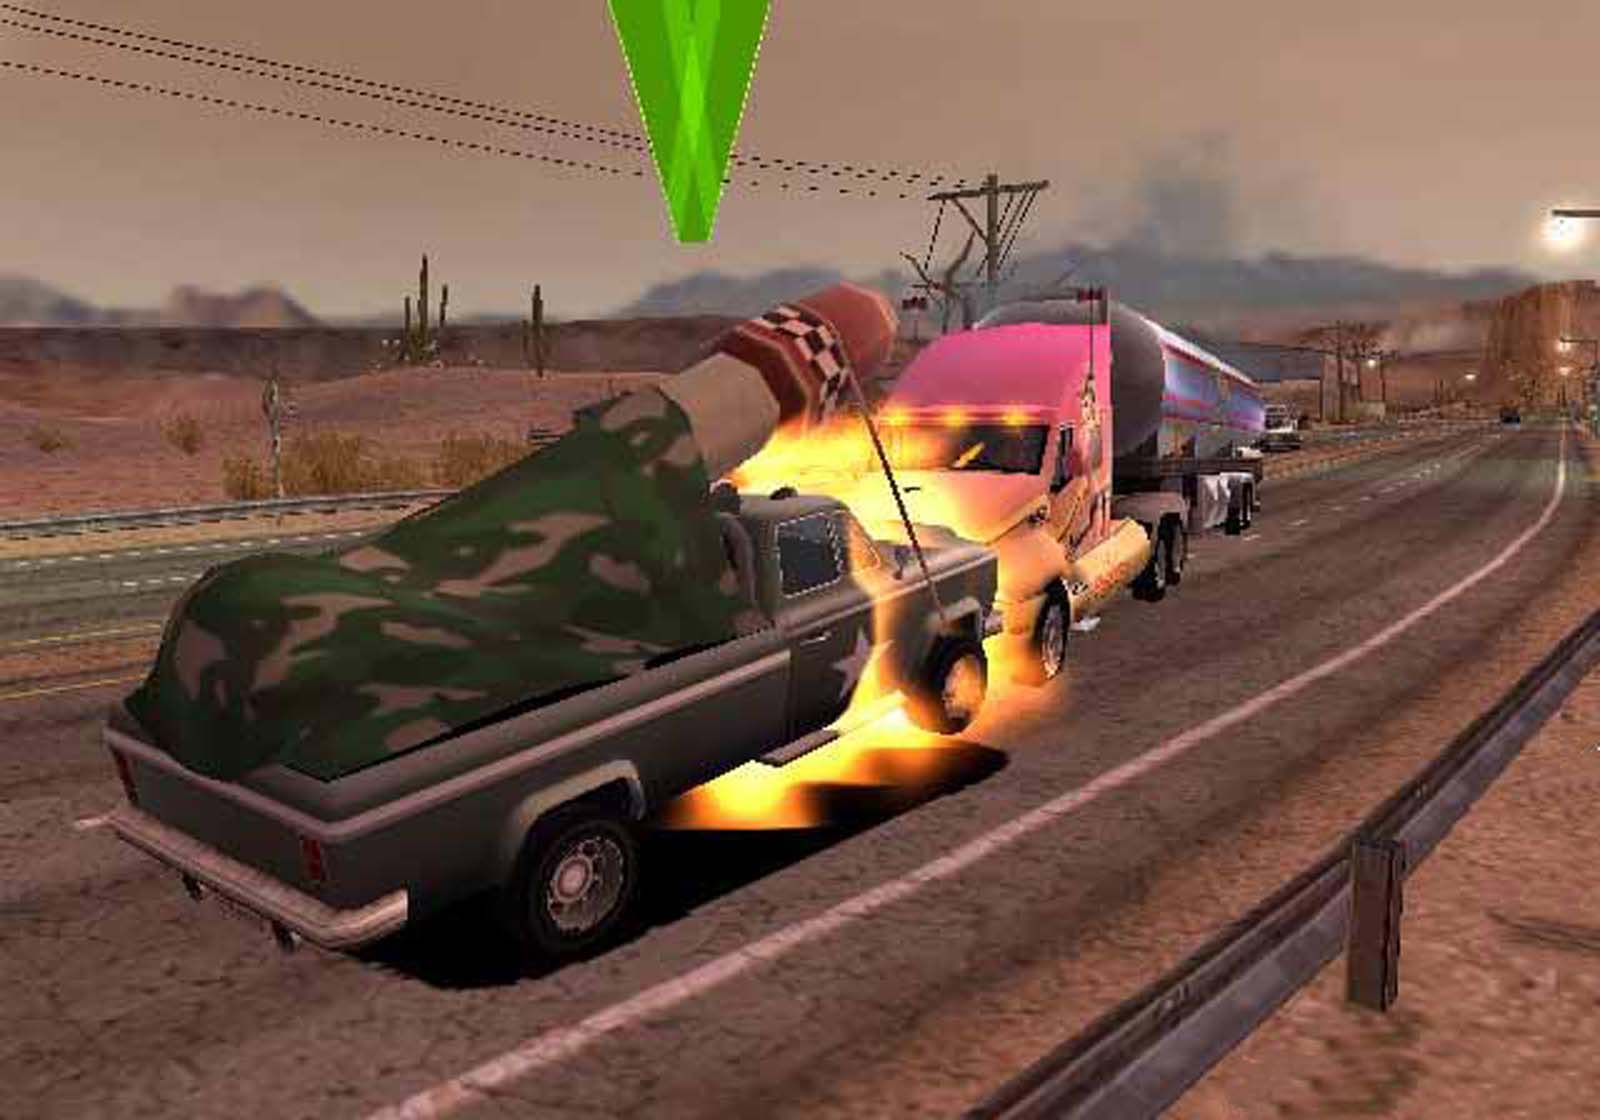 Big Mutha Truckers ROM (ISO) Download for Sony Playstation 2 / PS2 